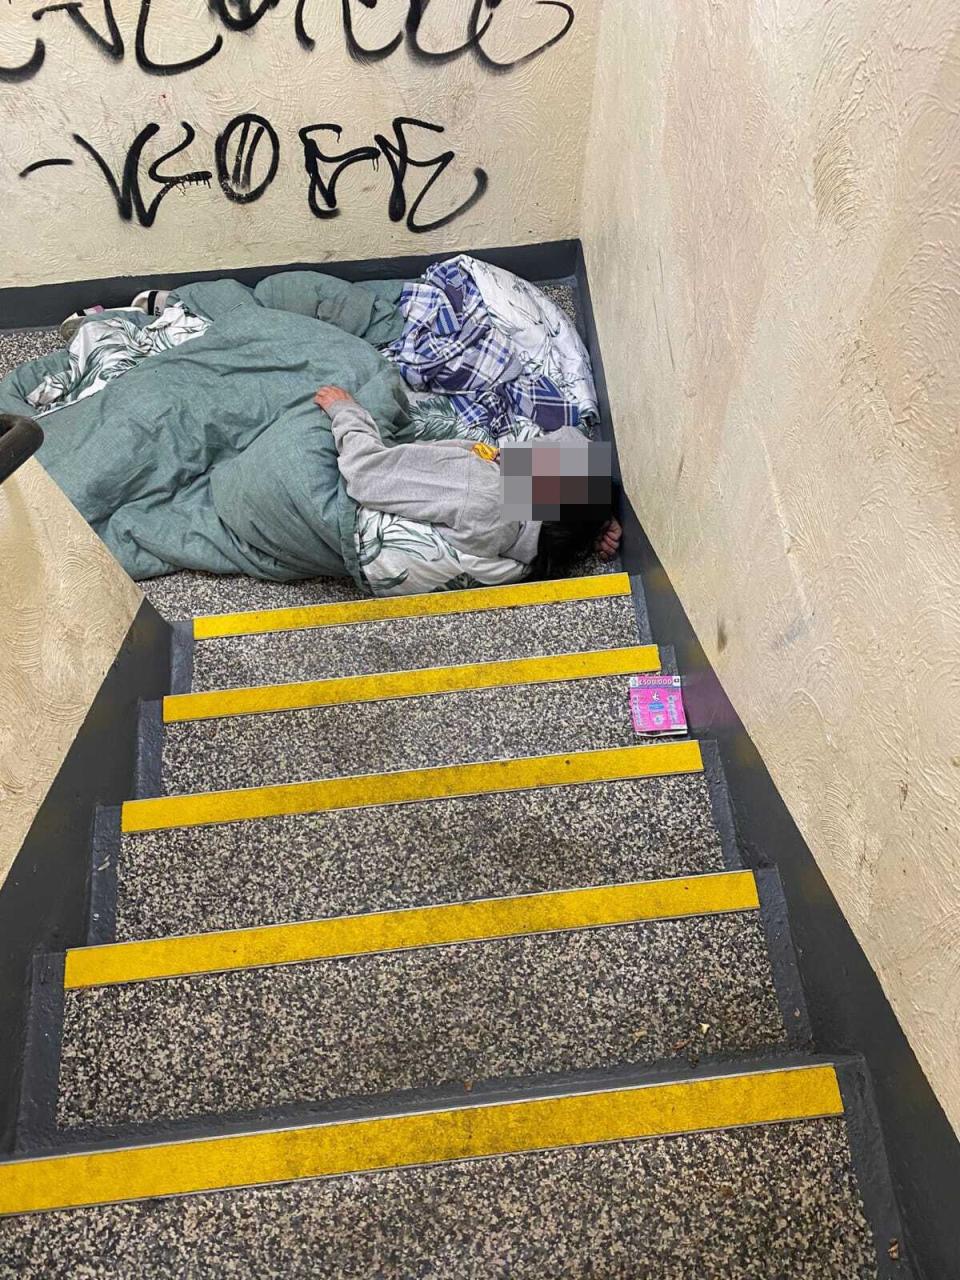 A person sleeping in the stairwell of Milford Towers (Supplied)